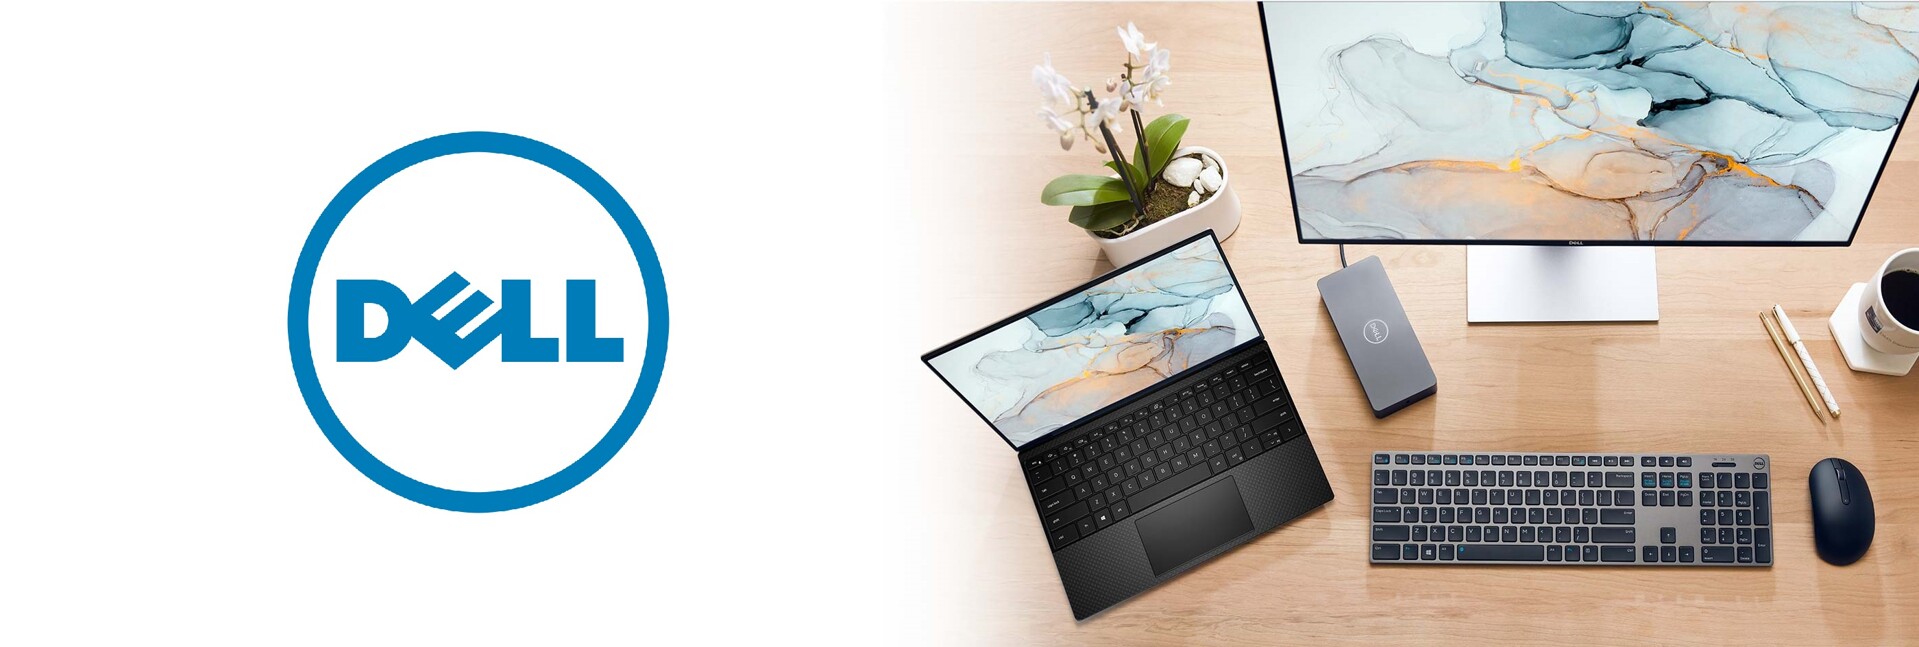 dell banner itzoo 